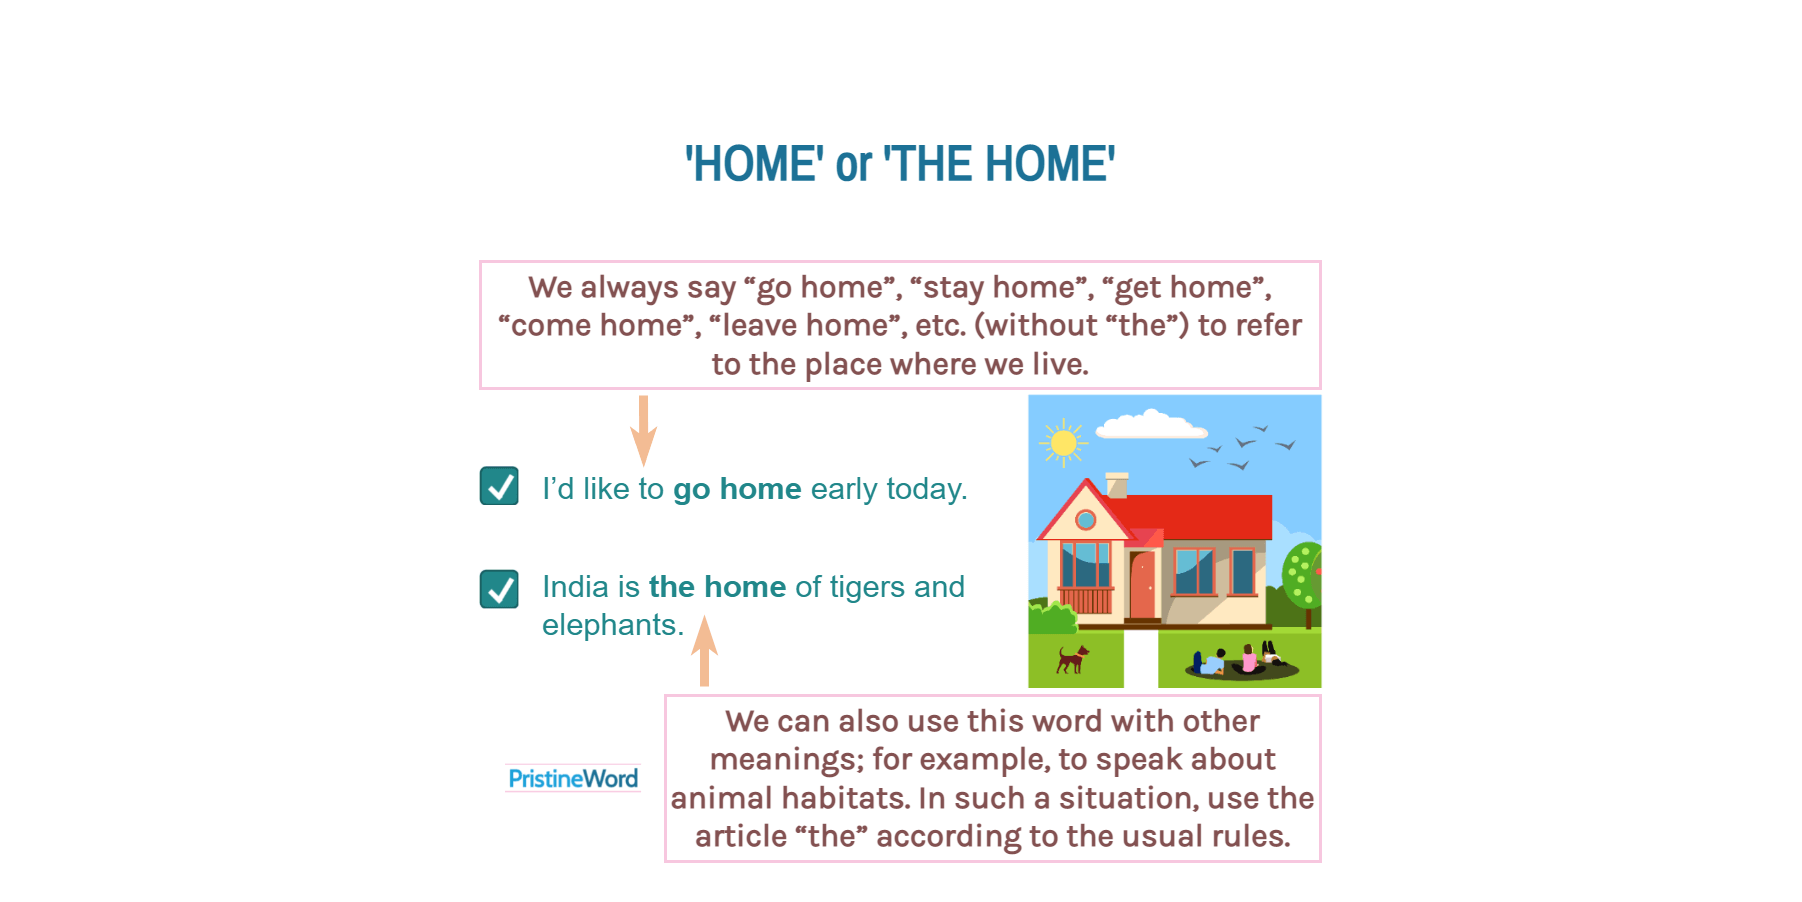 Can You Use the Article 'The' With 'HOME'?